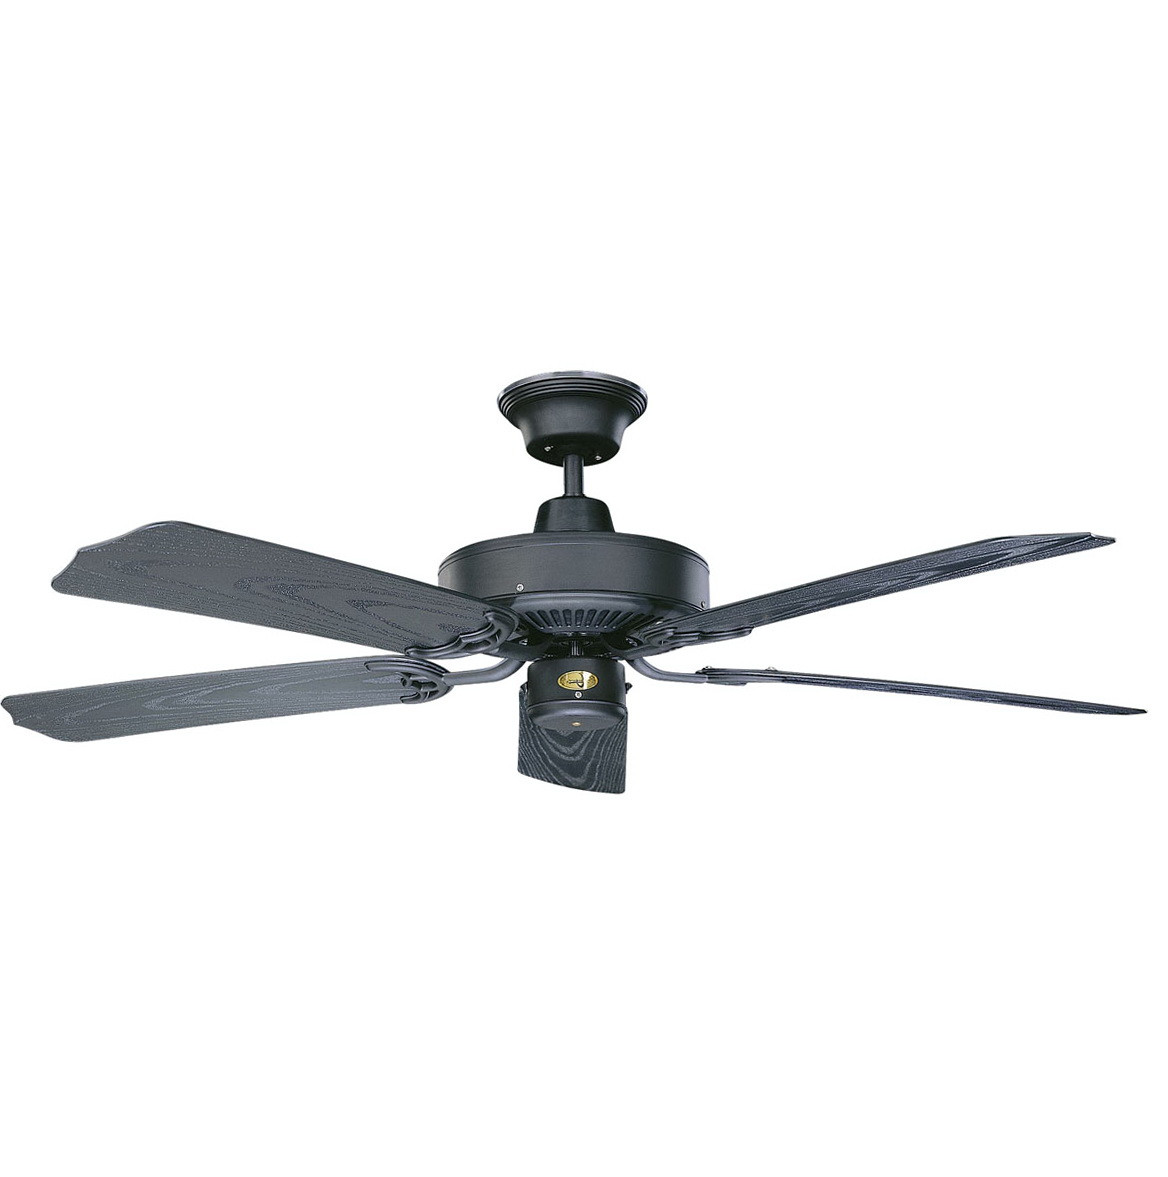 Small Kitchen Ceiling Fans
 Small kitchen ceiling fans